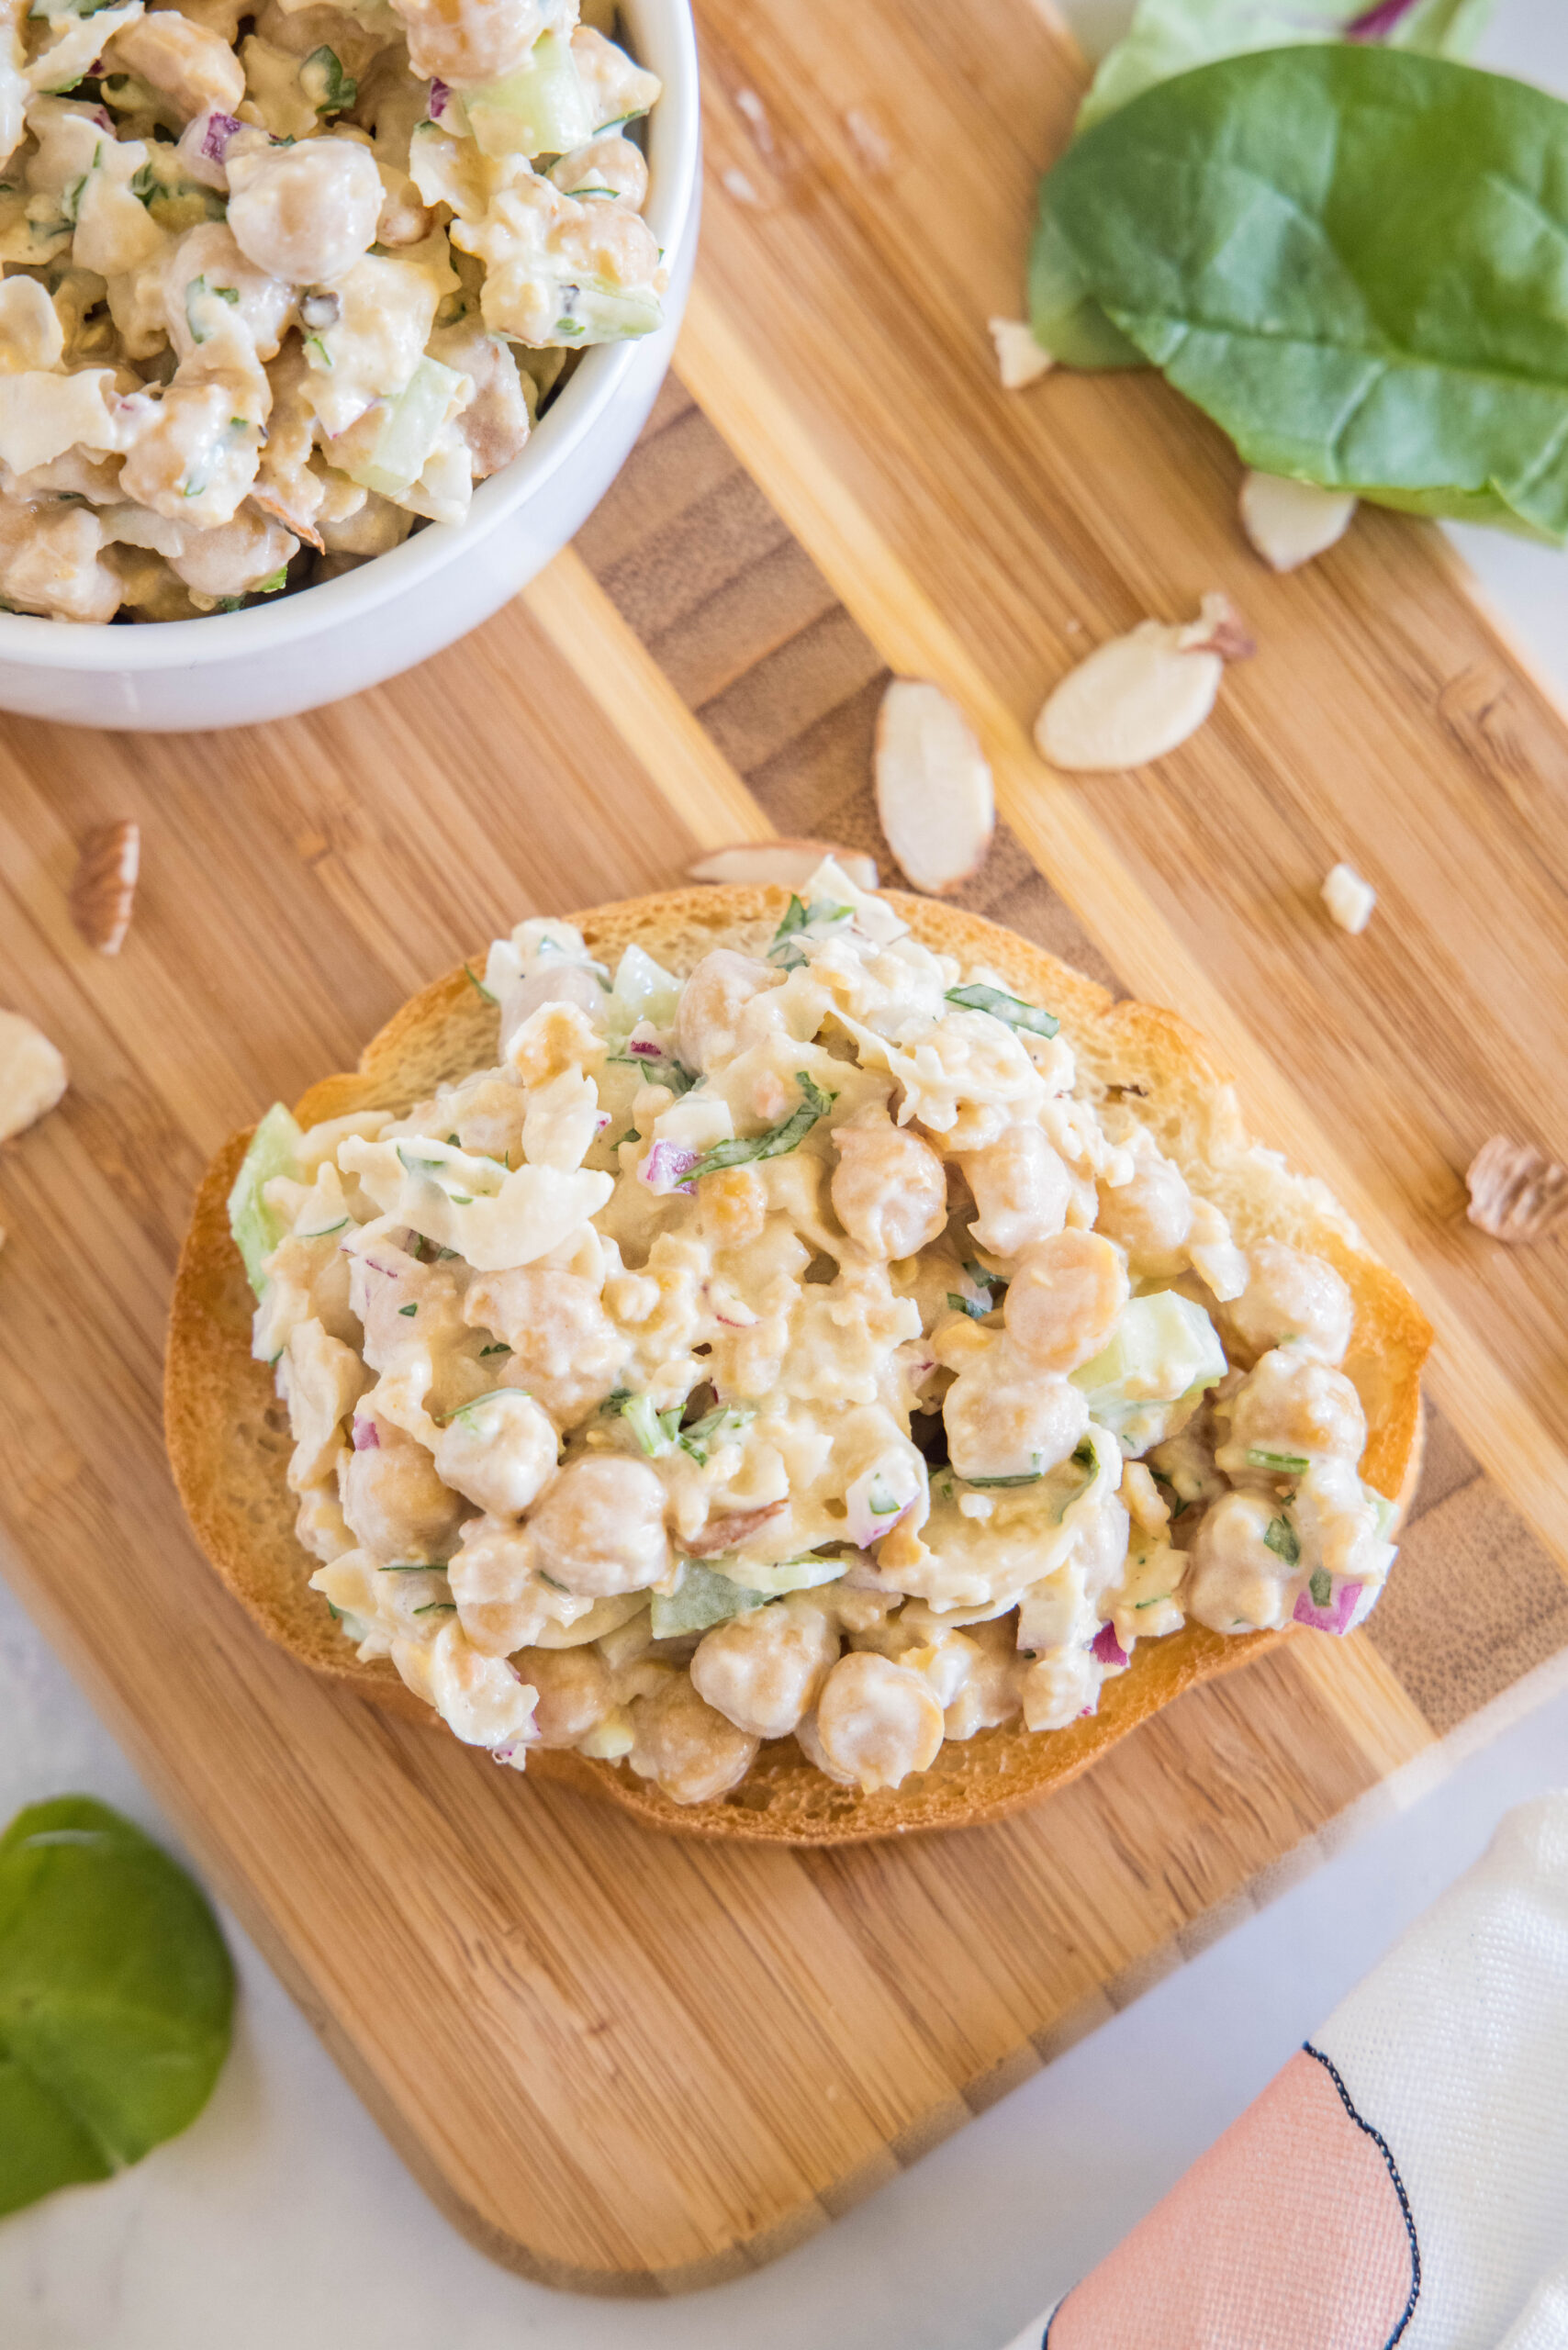 Overhead view of chickpea chicken salad served on a slice of bread next to a bowl of chickpea salad on a wooden cutting board.